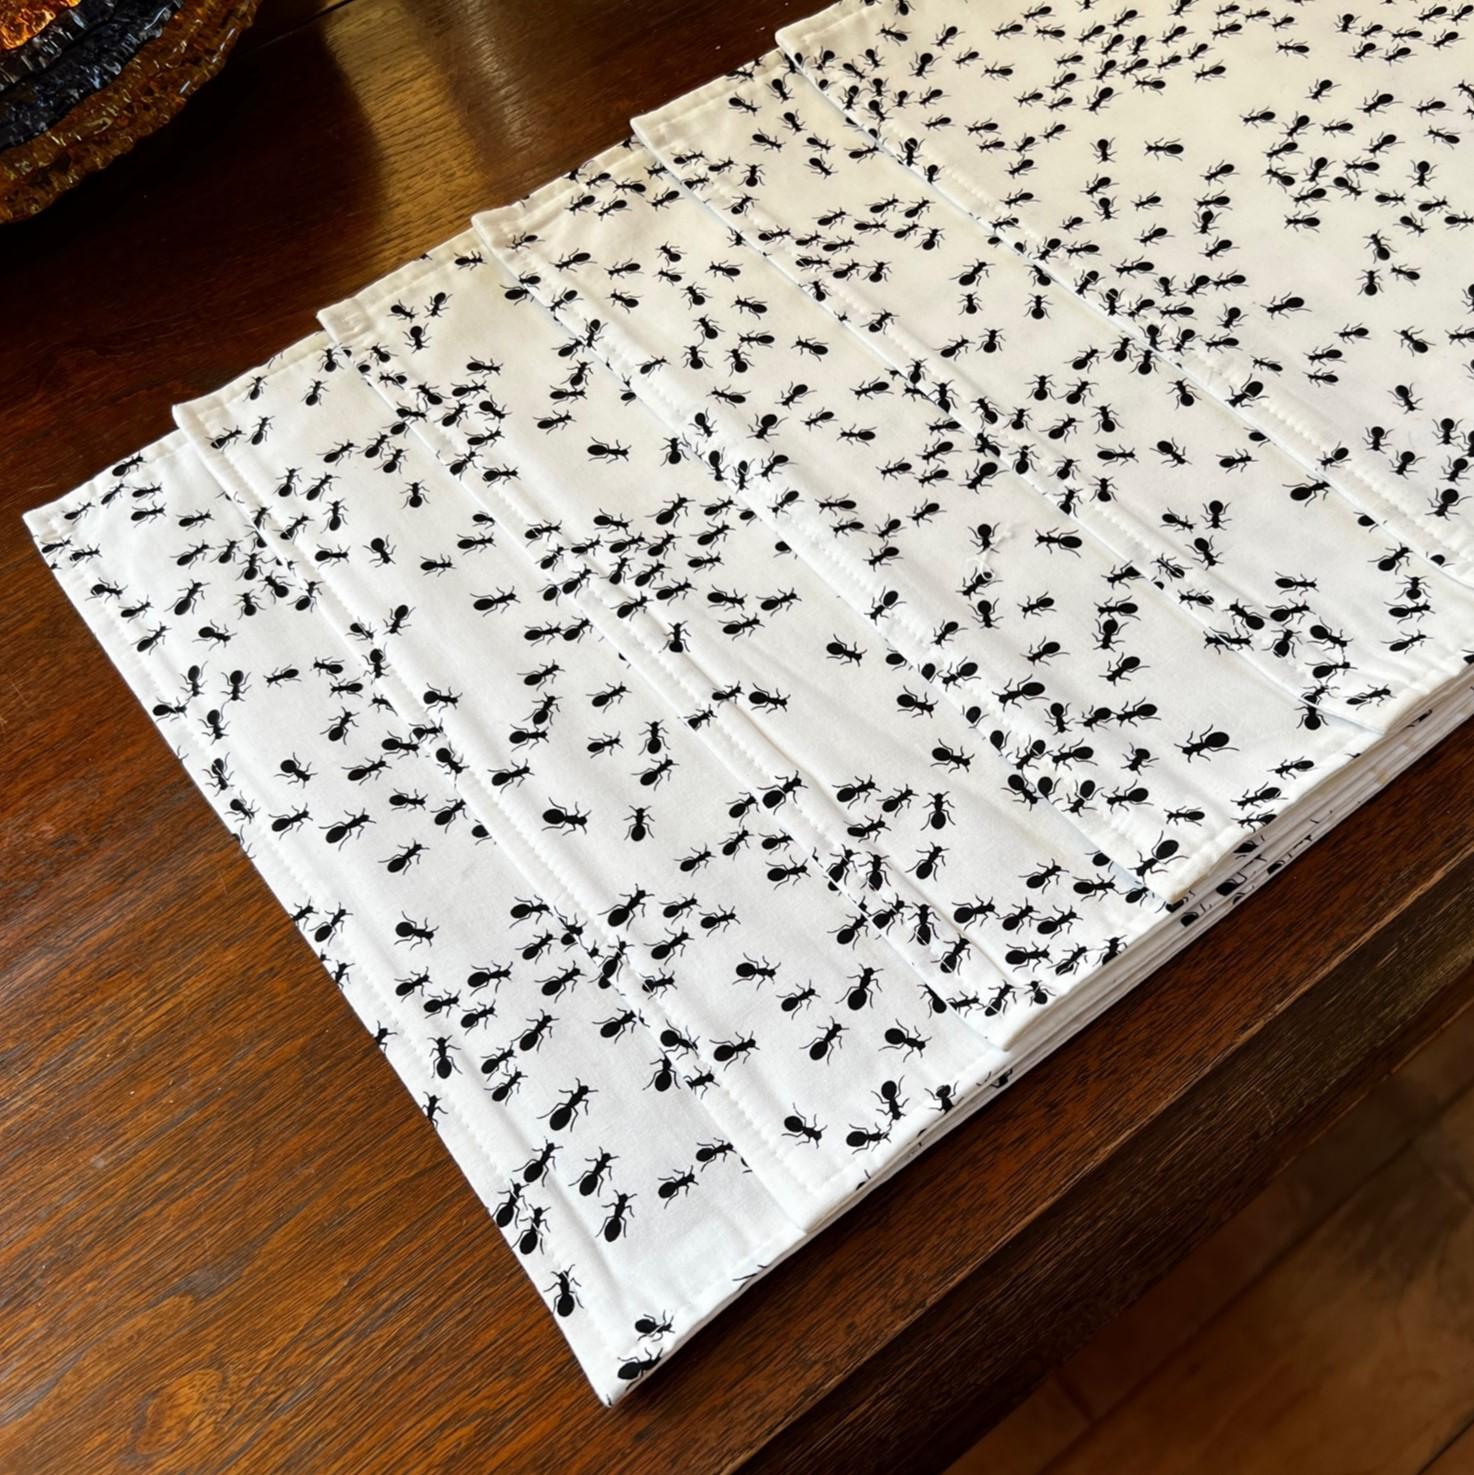 21st c. American, a set of 6 cotton placemats. White background with an army of printed black ants marching all over.

Dimensions:
17